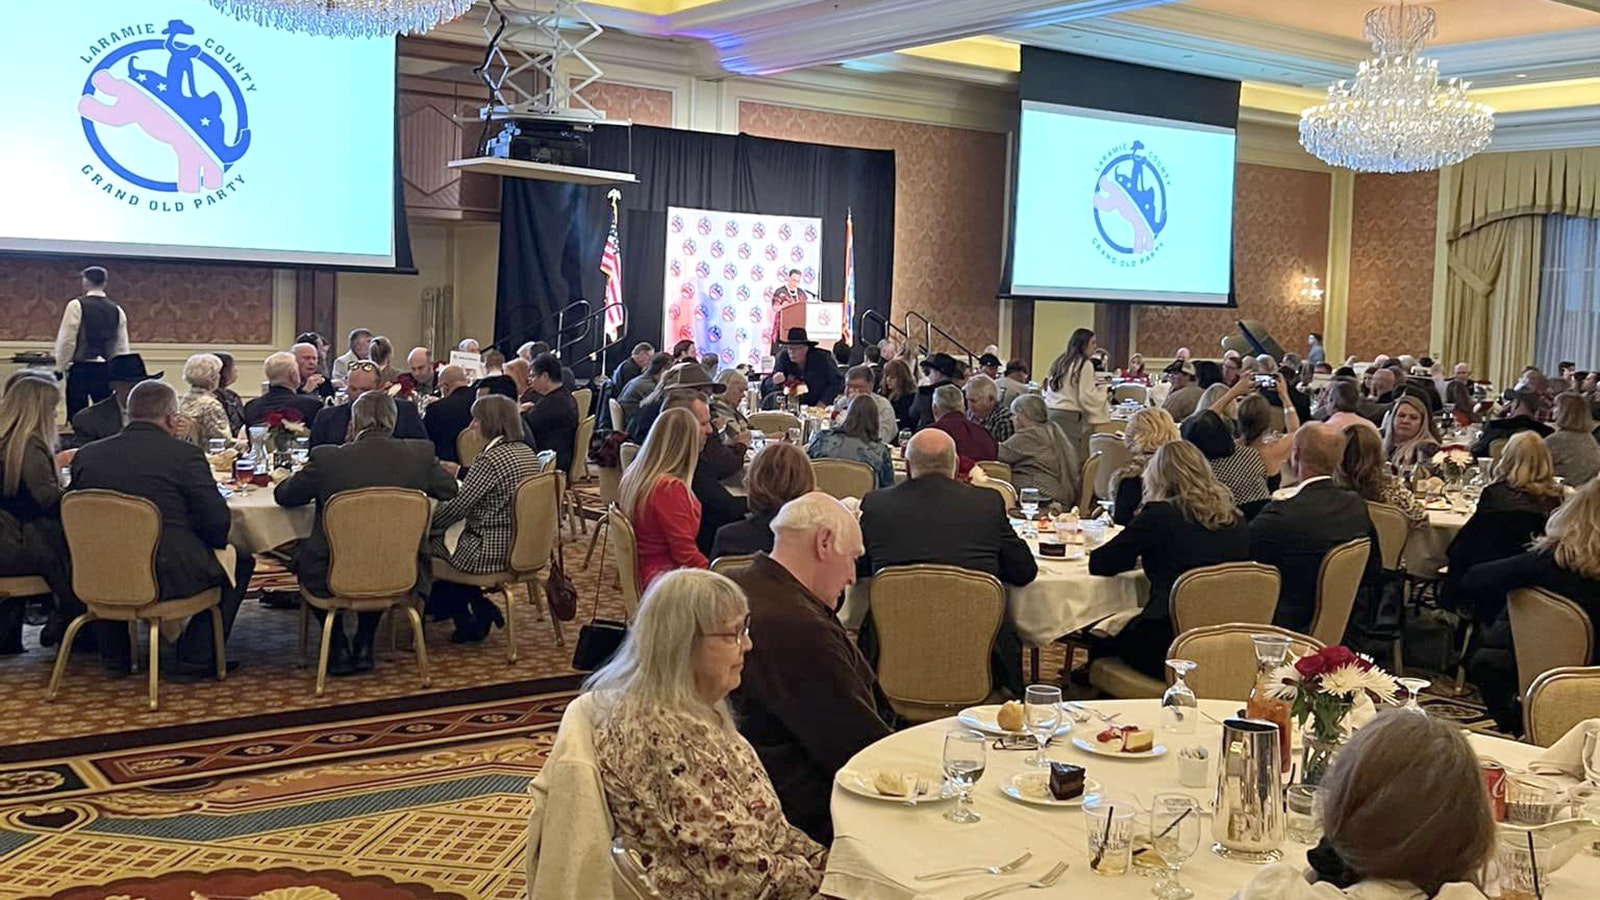 It was a packed house recently for the annual Laramie County Republican Party Lincoln Day Dinner in Cheyenne.